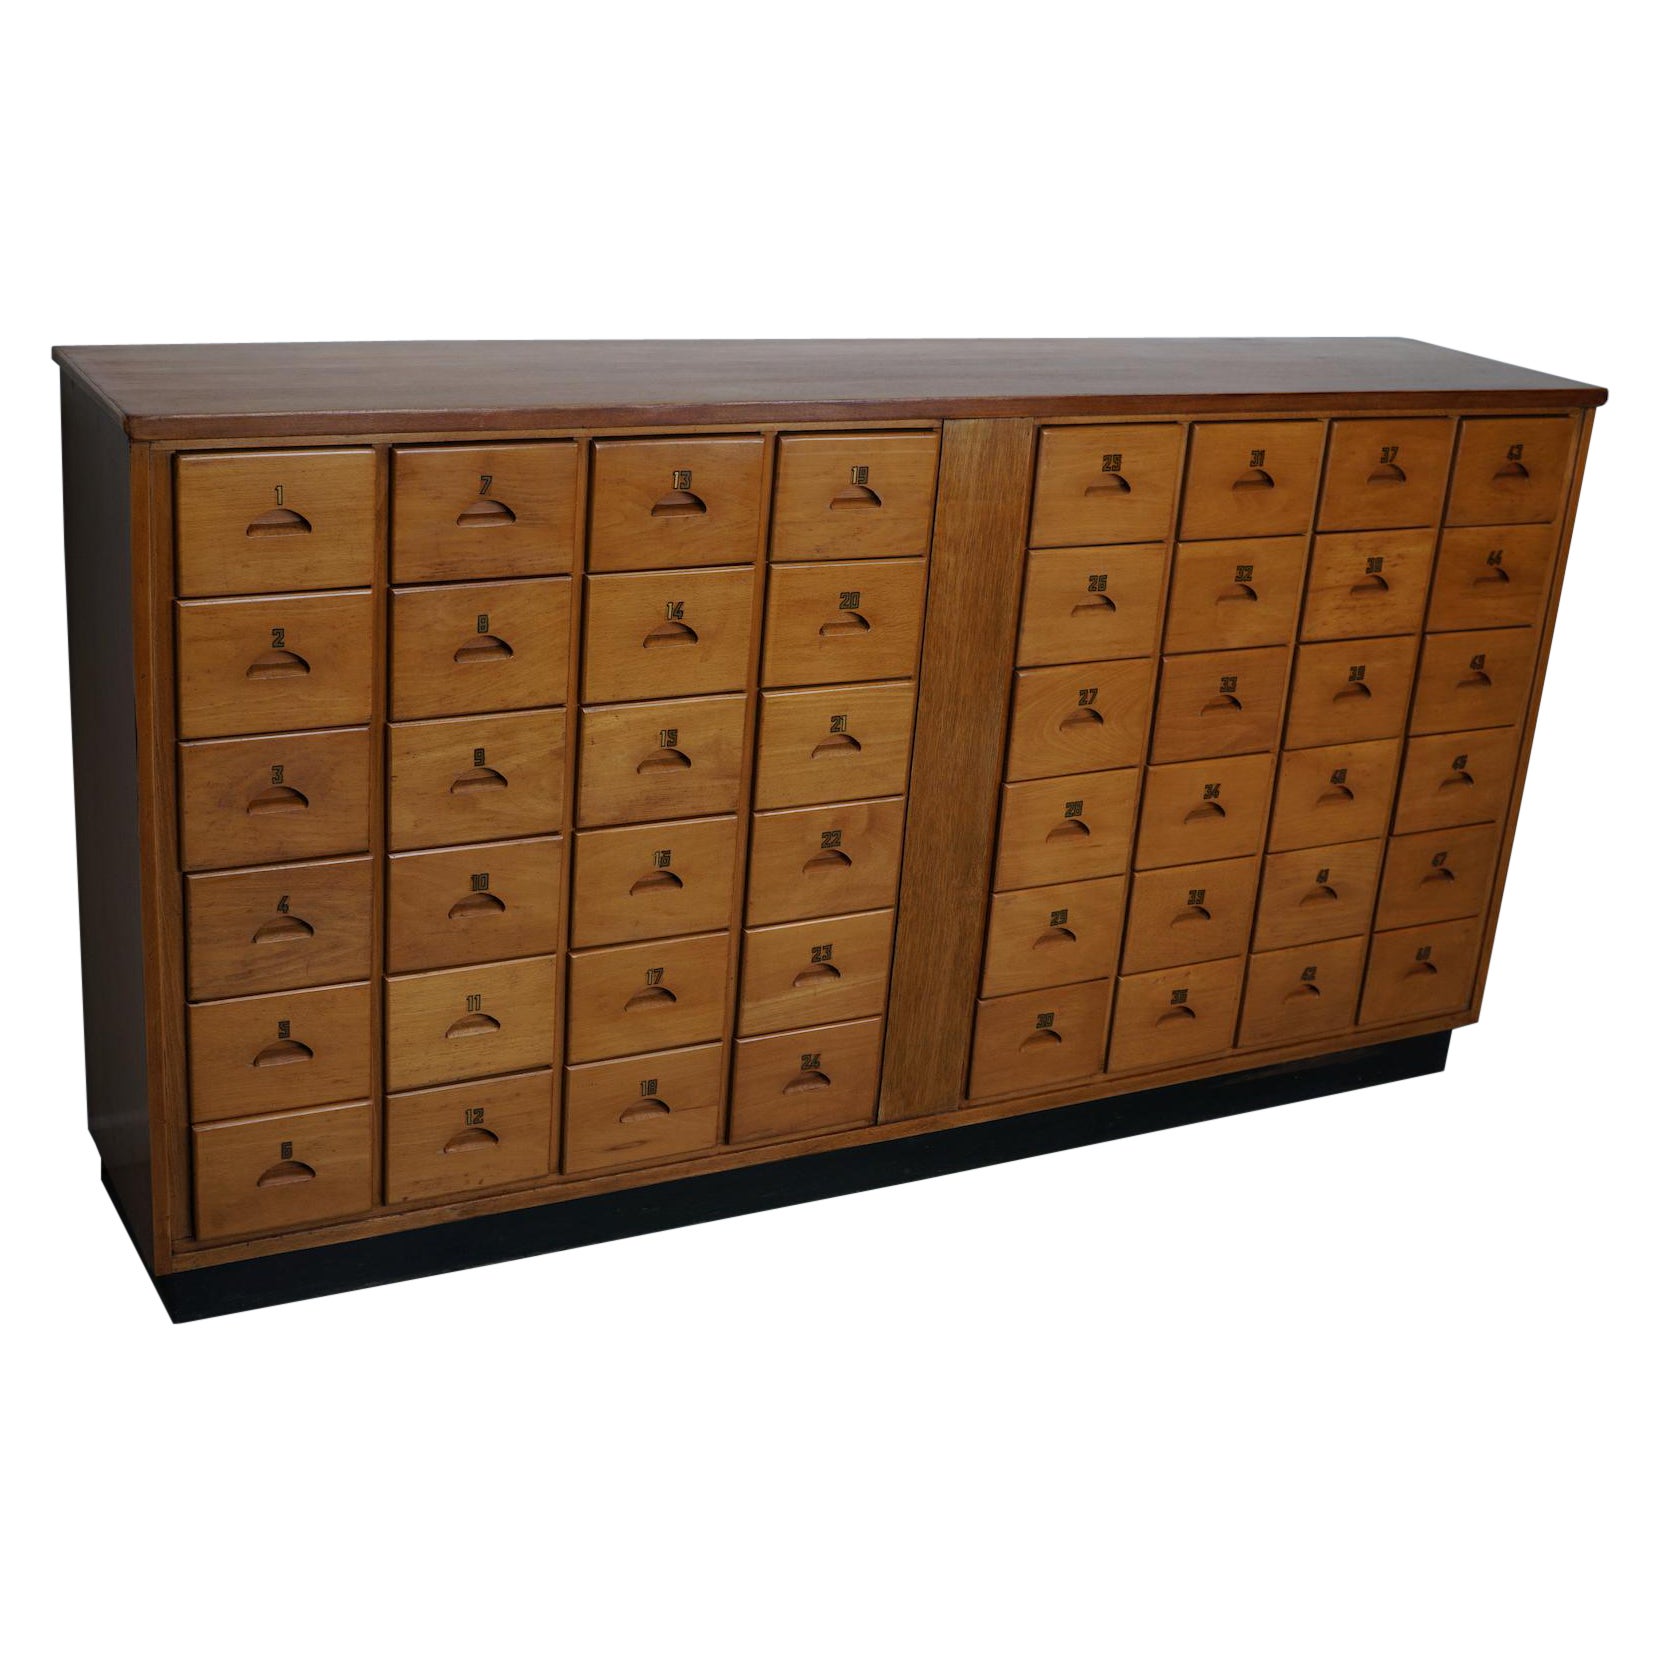 Dutch Industrial Beech Apothecary / School Cabinet, Mid-20th Century For Sale